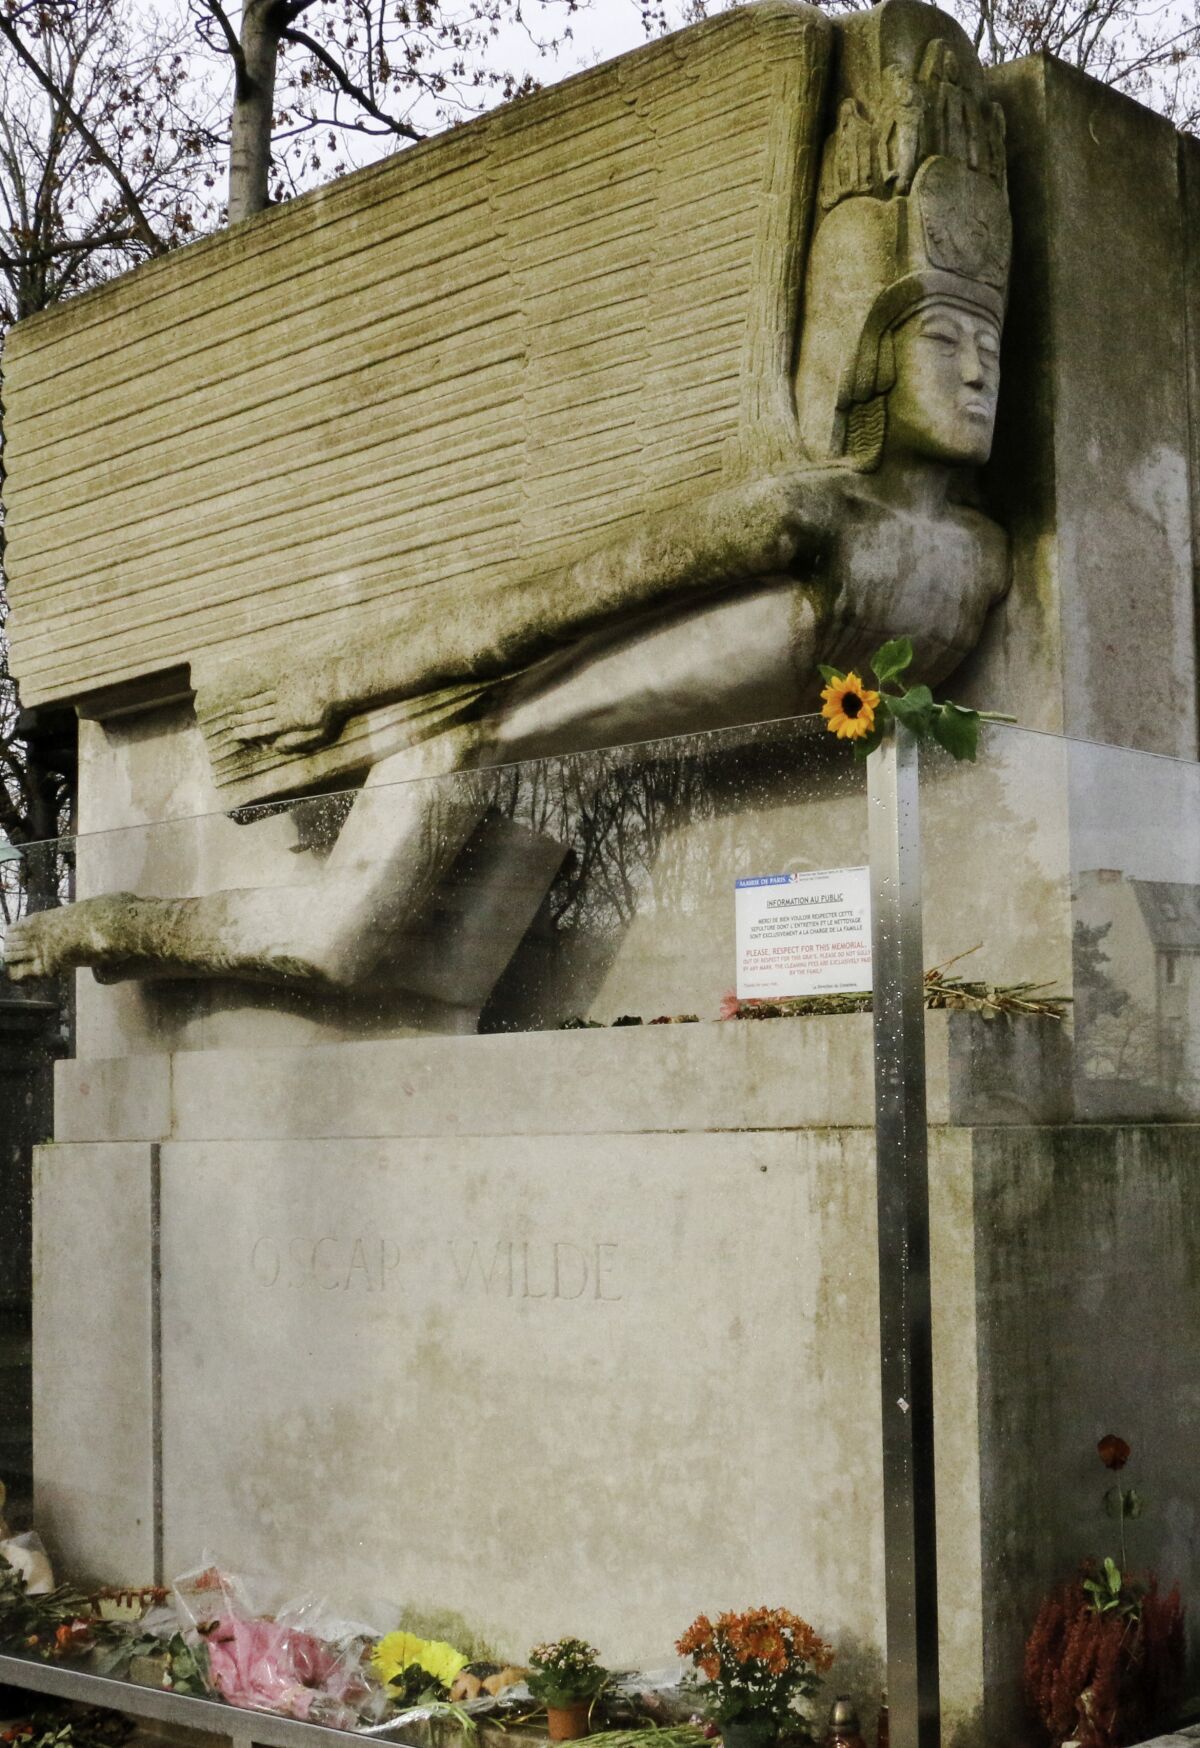 The tomb of Oscar Wilde, sculpted by American artist Jacob Epstein, at Père-Lachaise Cemetery in Paris.